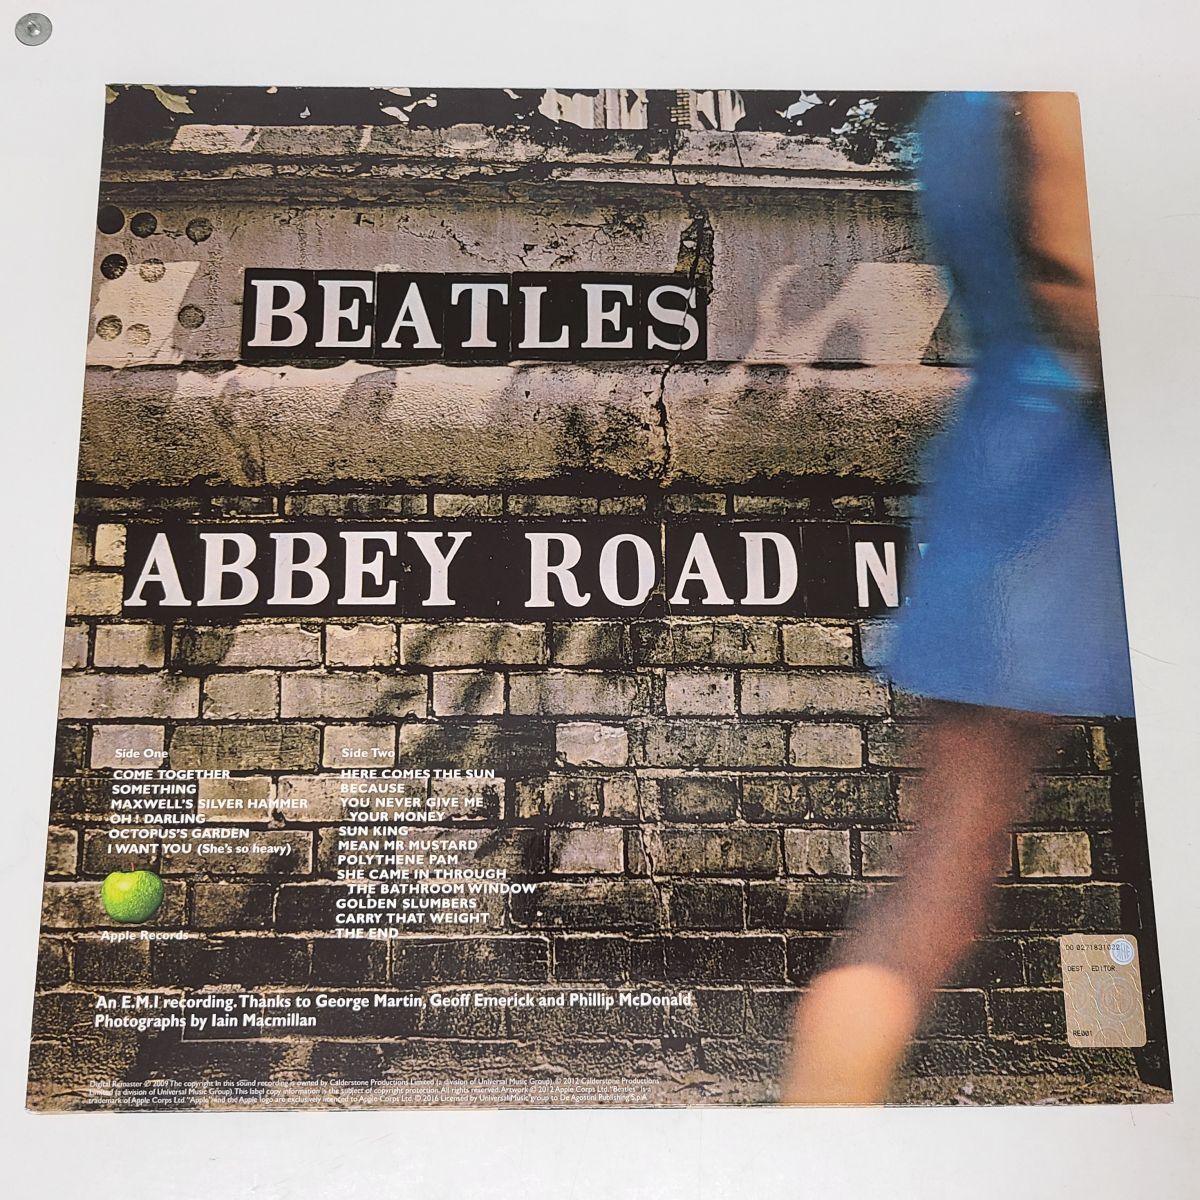 LP record * magazine /. weekly The * Beatles *LP record * collection No.1abii* load / ISBN978-4-8135-2163-1[M030]